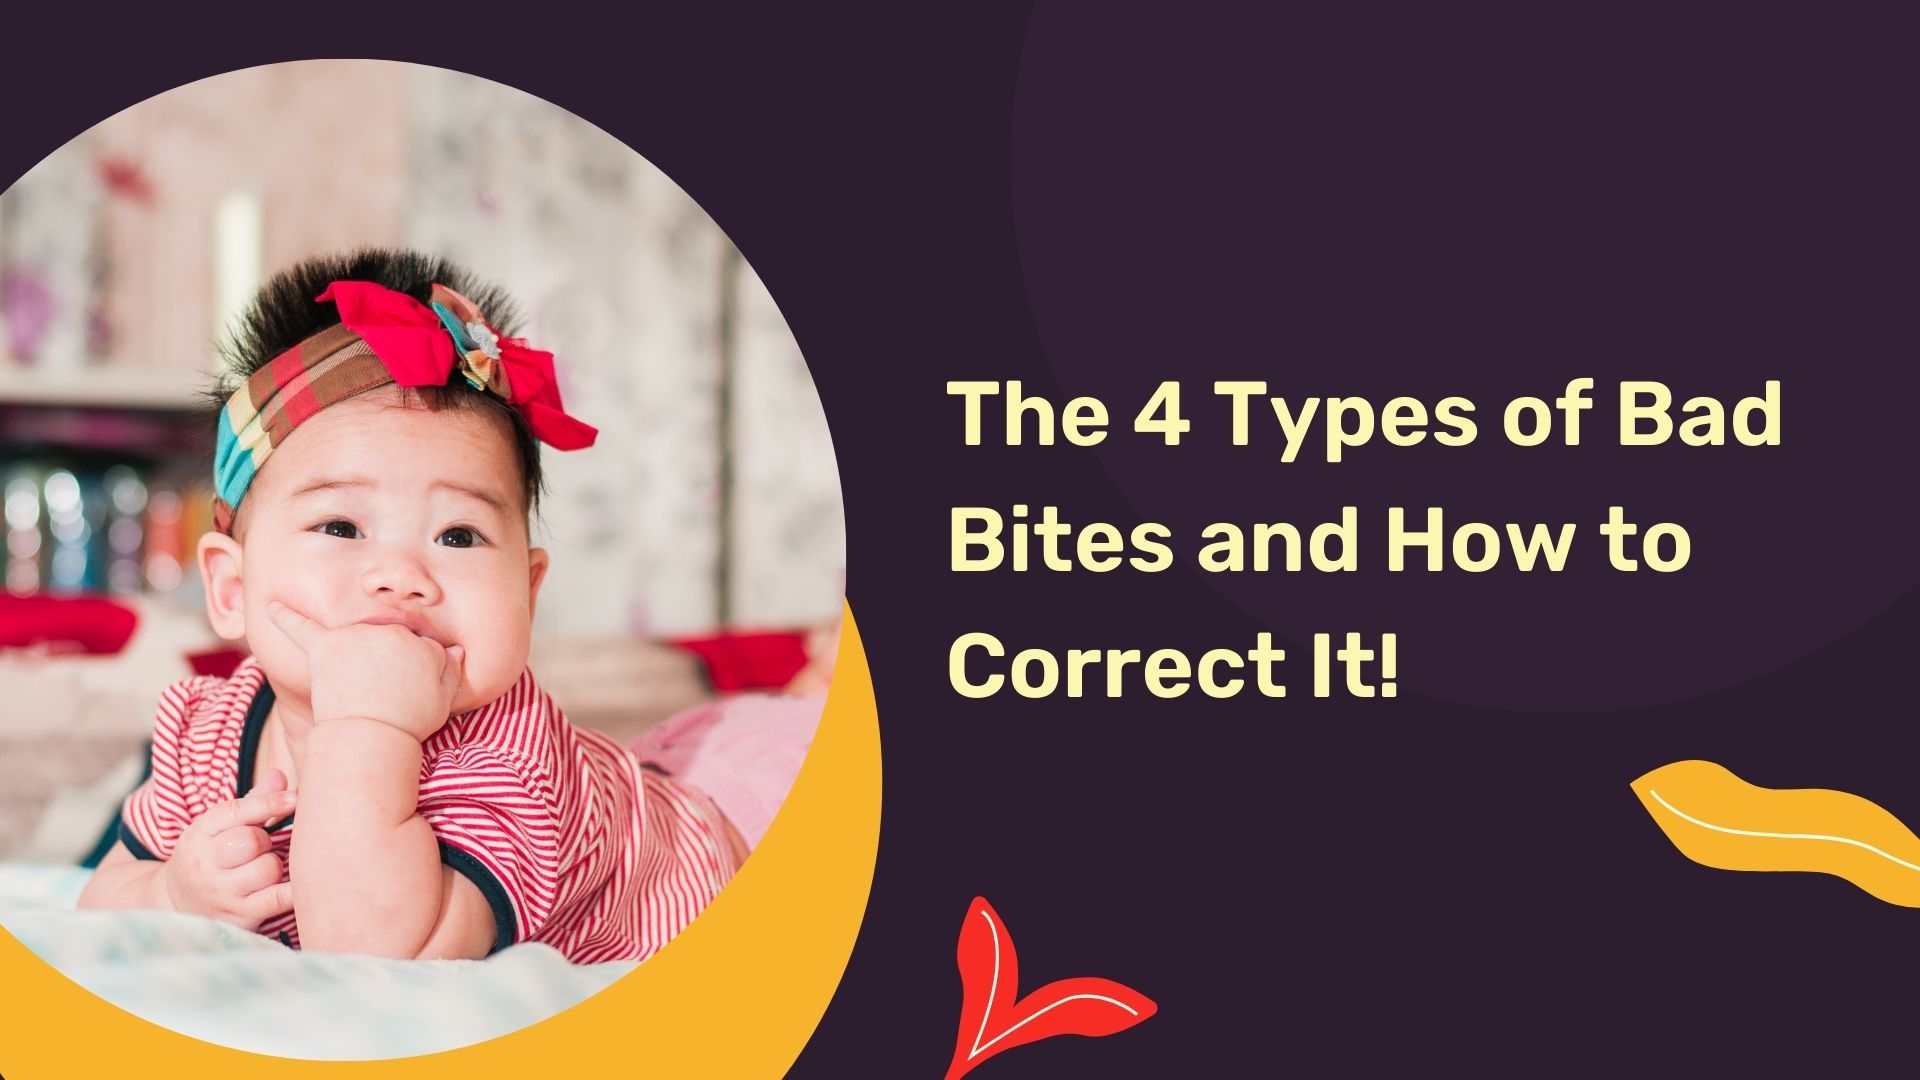 Learn-about-the-four-kinds-of-bad-bites-and-how-to-correct-them-here